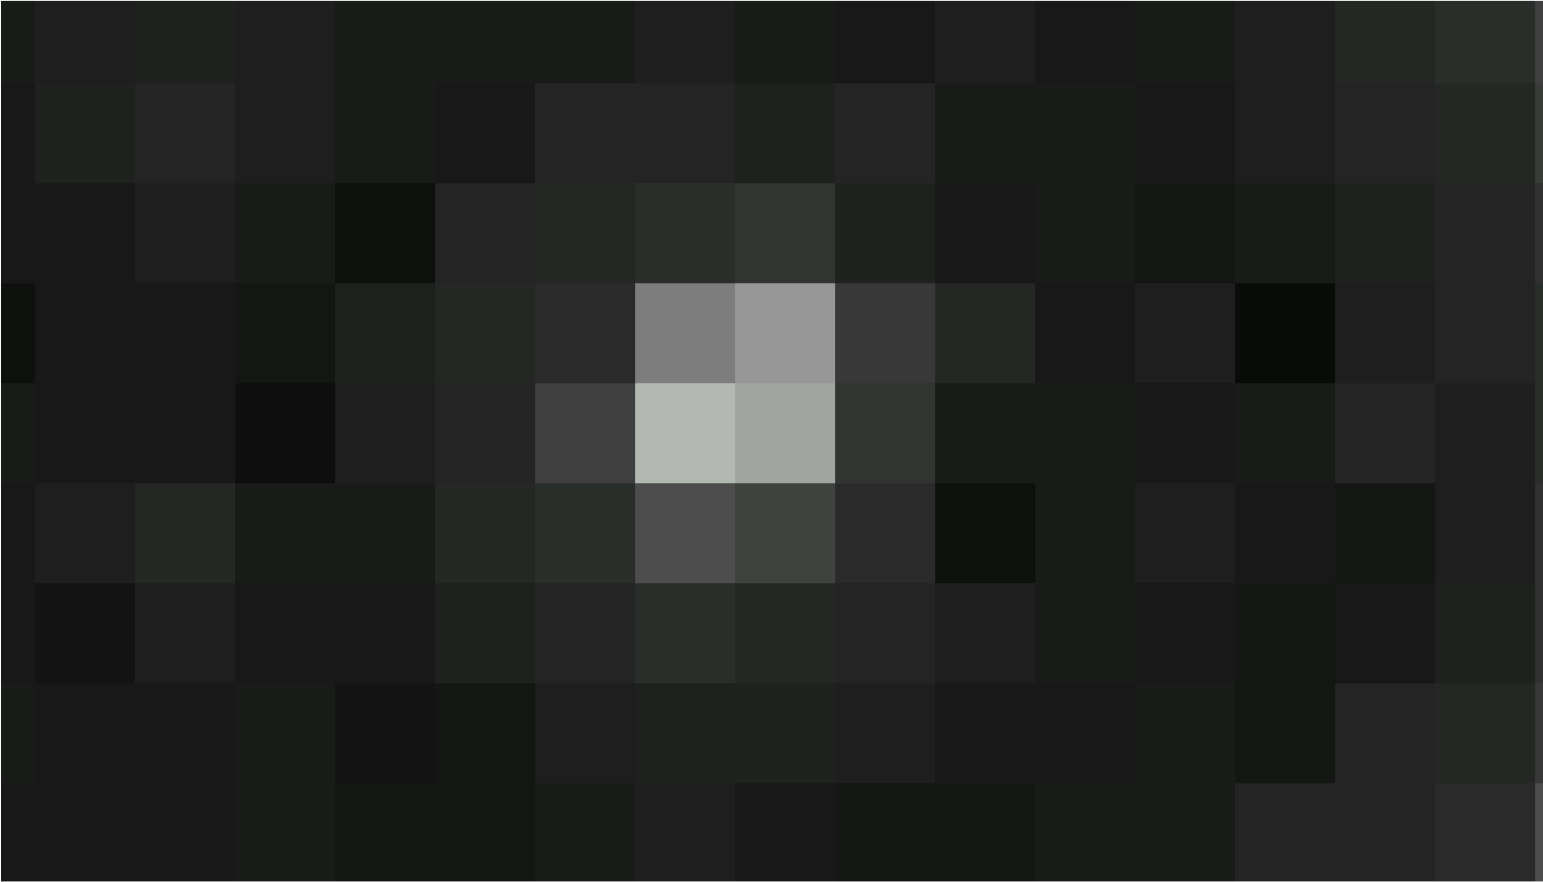 Zoomed in view of pixels.